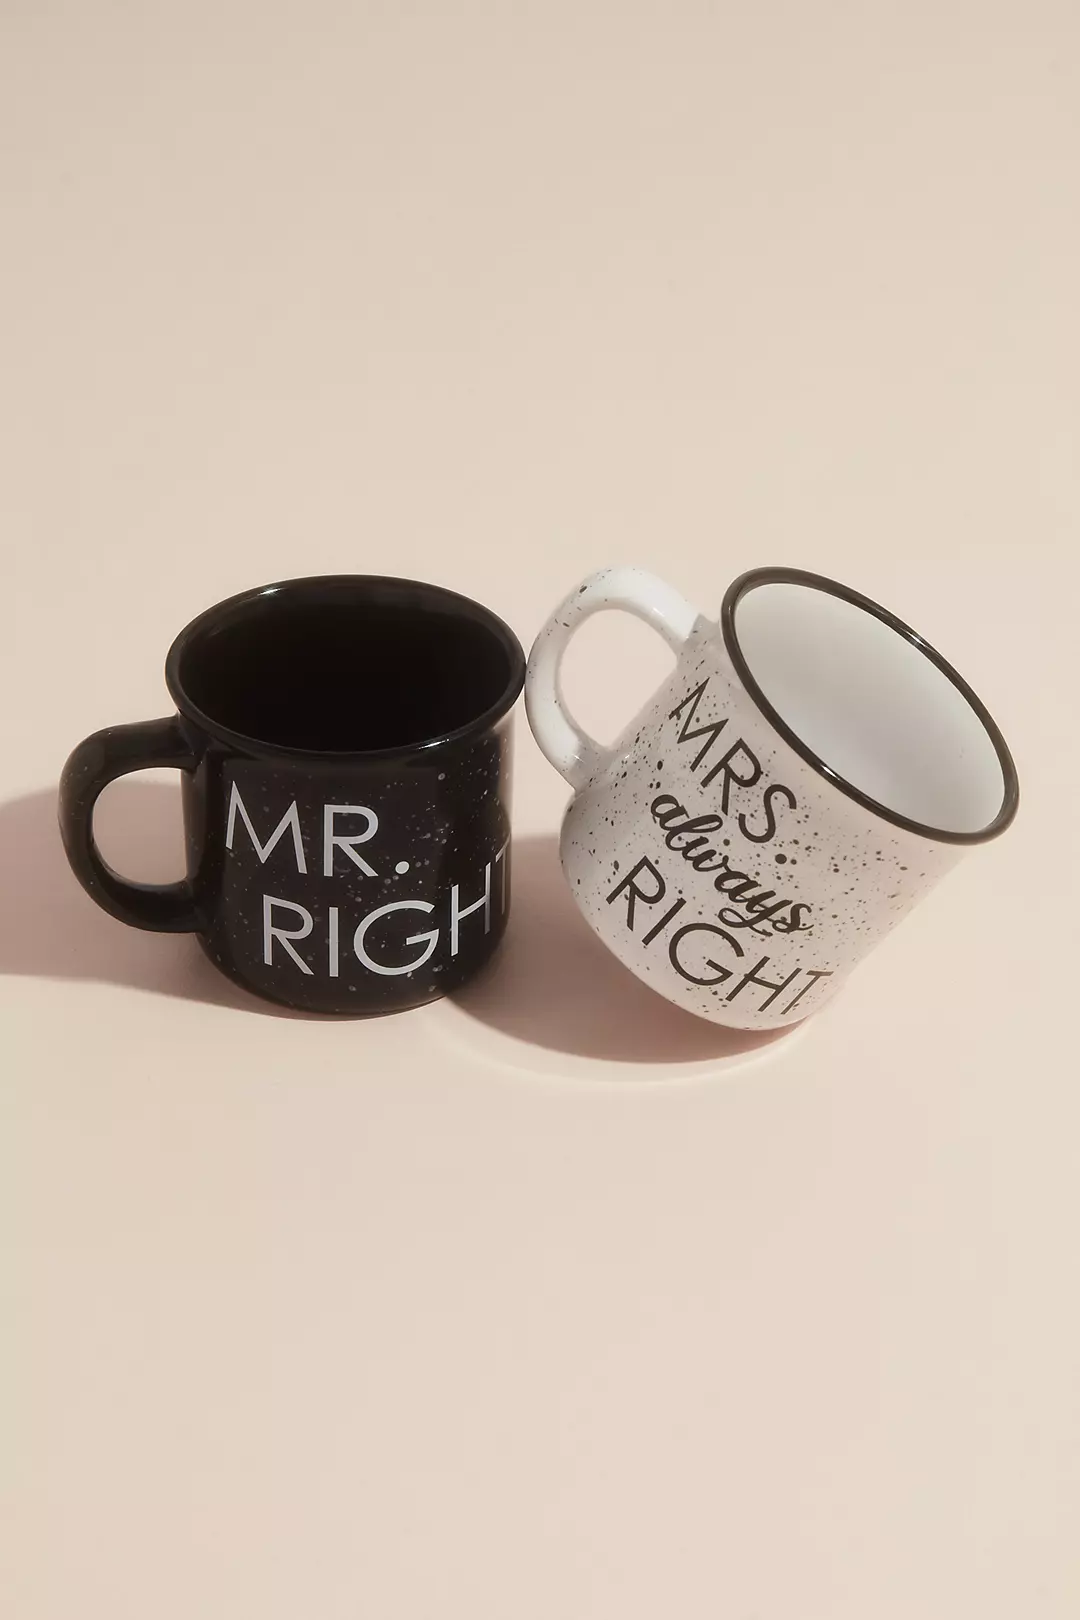 Mr Right and Mrs Always Right Campfire Mug Sets Image